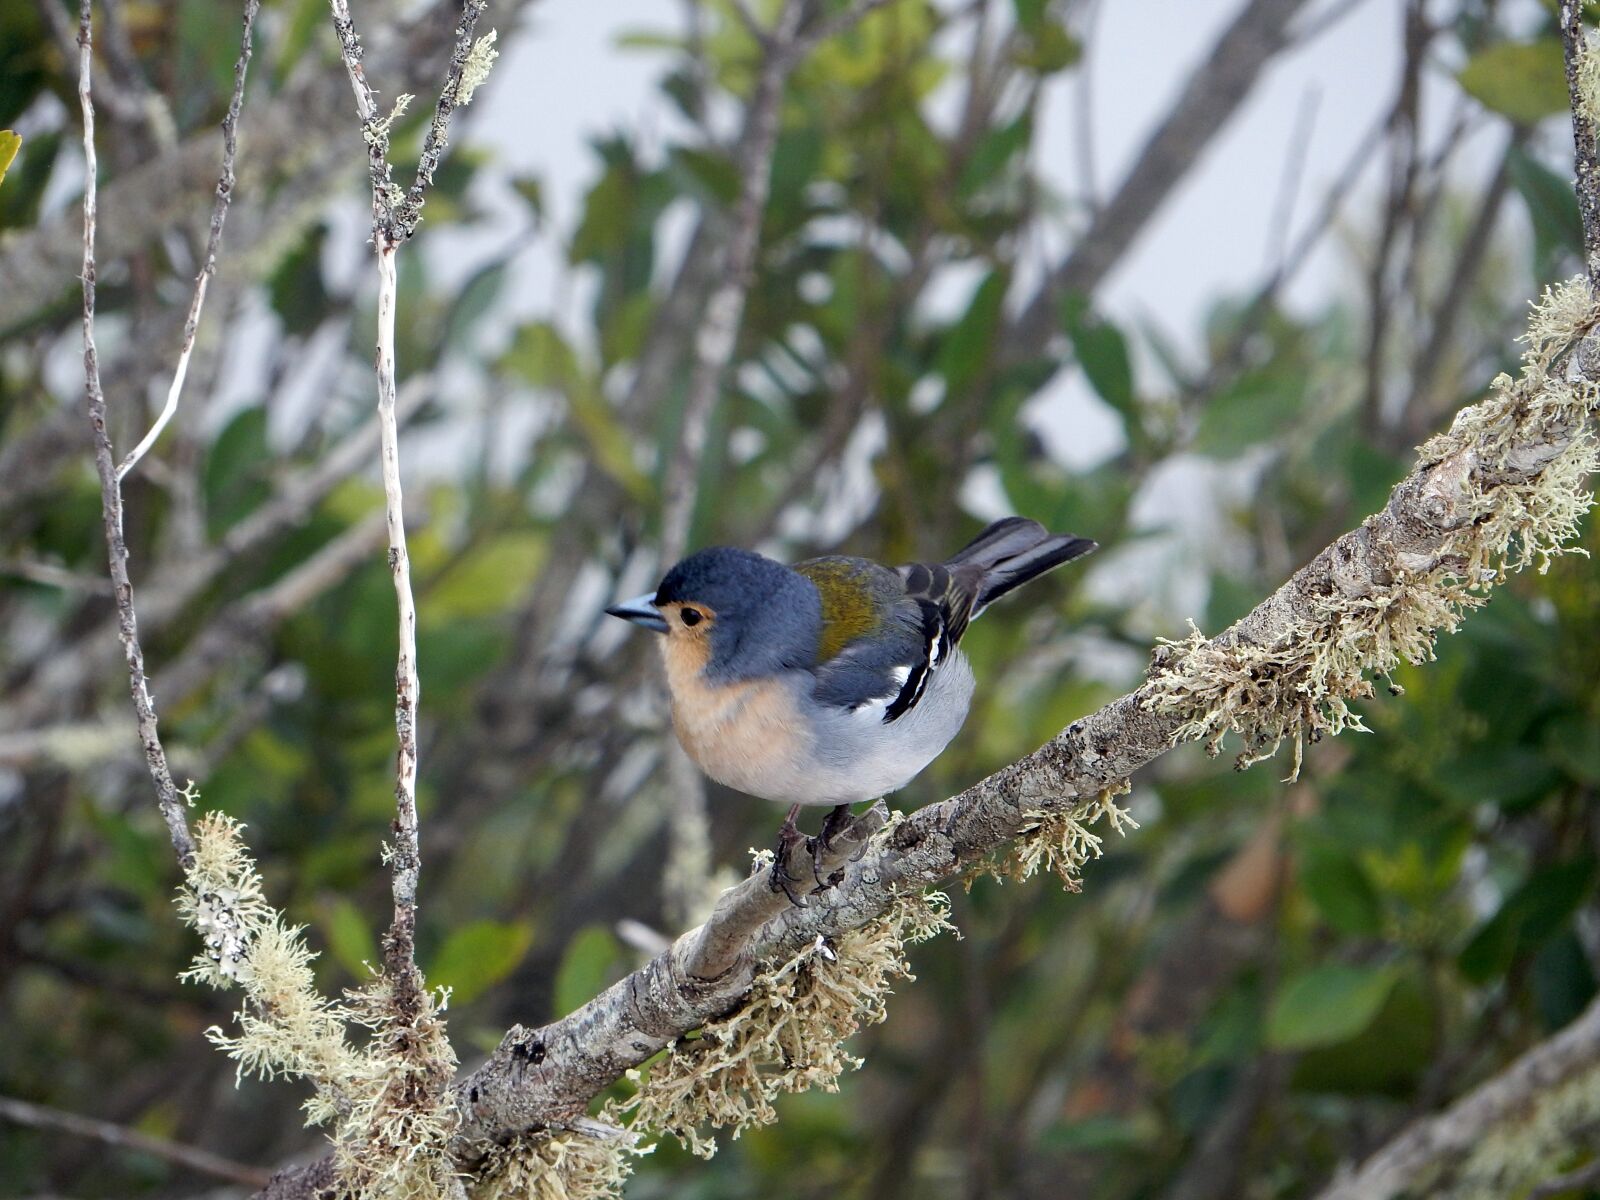 Nikon Coolpix S9700 sample photo. Chaffinch, madeira, branch photography